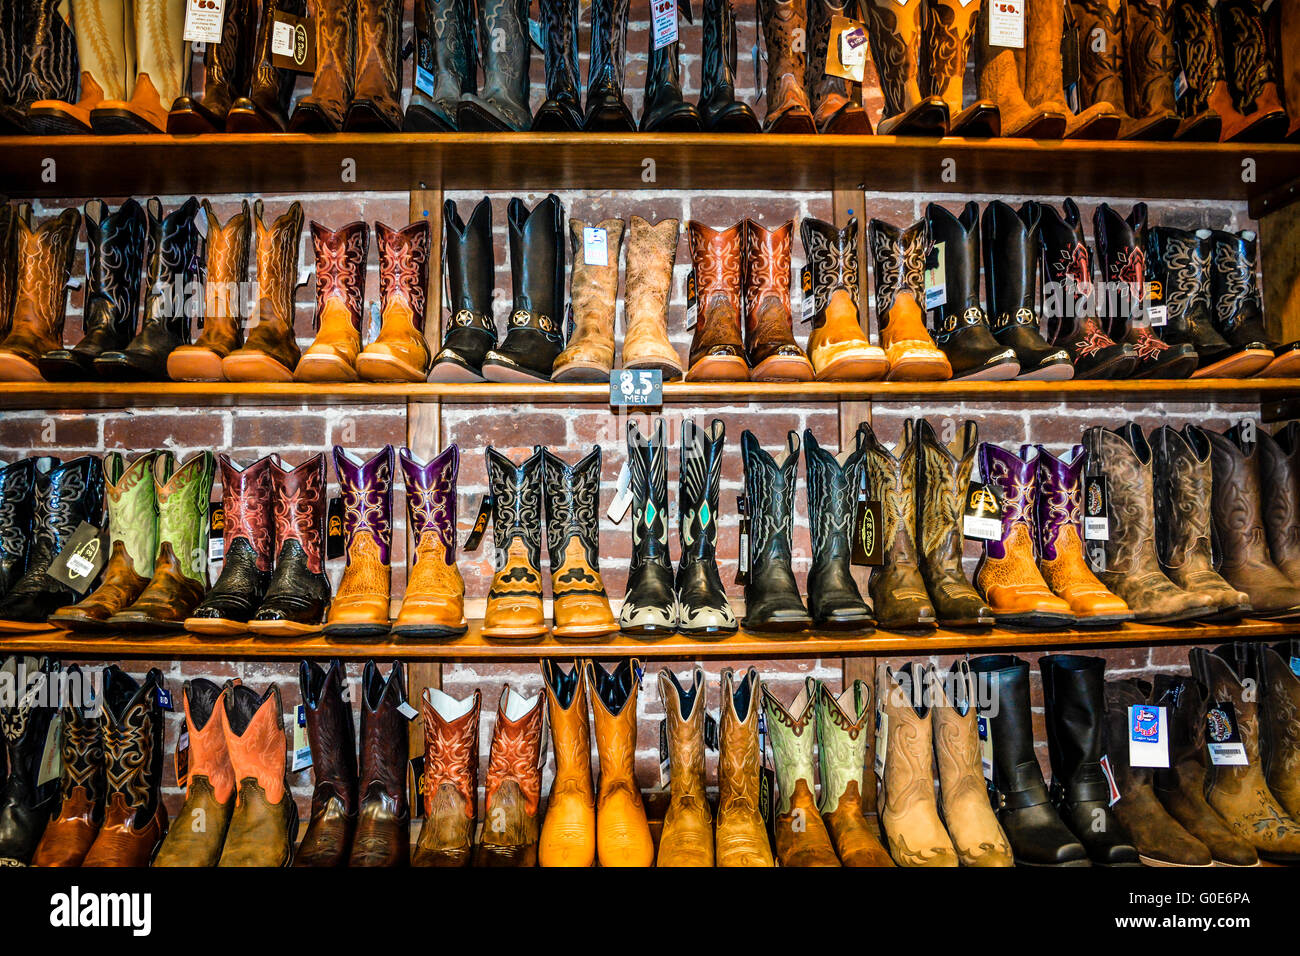 The Nashville Cowboy boot store has rows of unique Cowboy boots for sale in  the downtown entertainment district in Nashville TN Stock Photo - Alamy